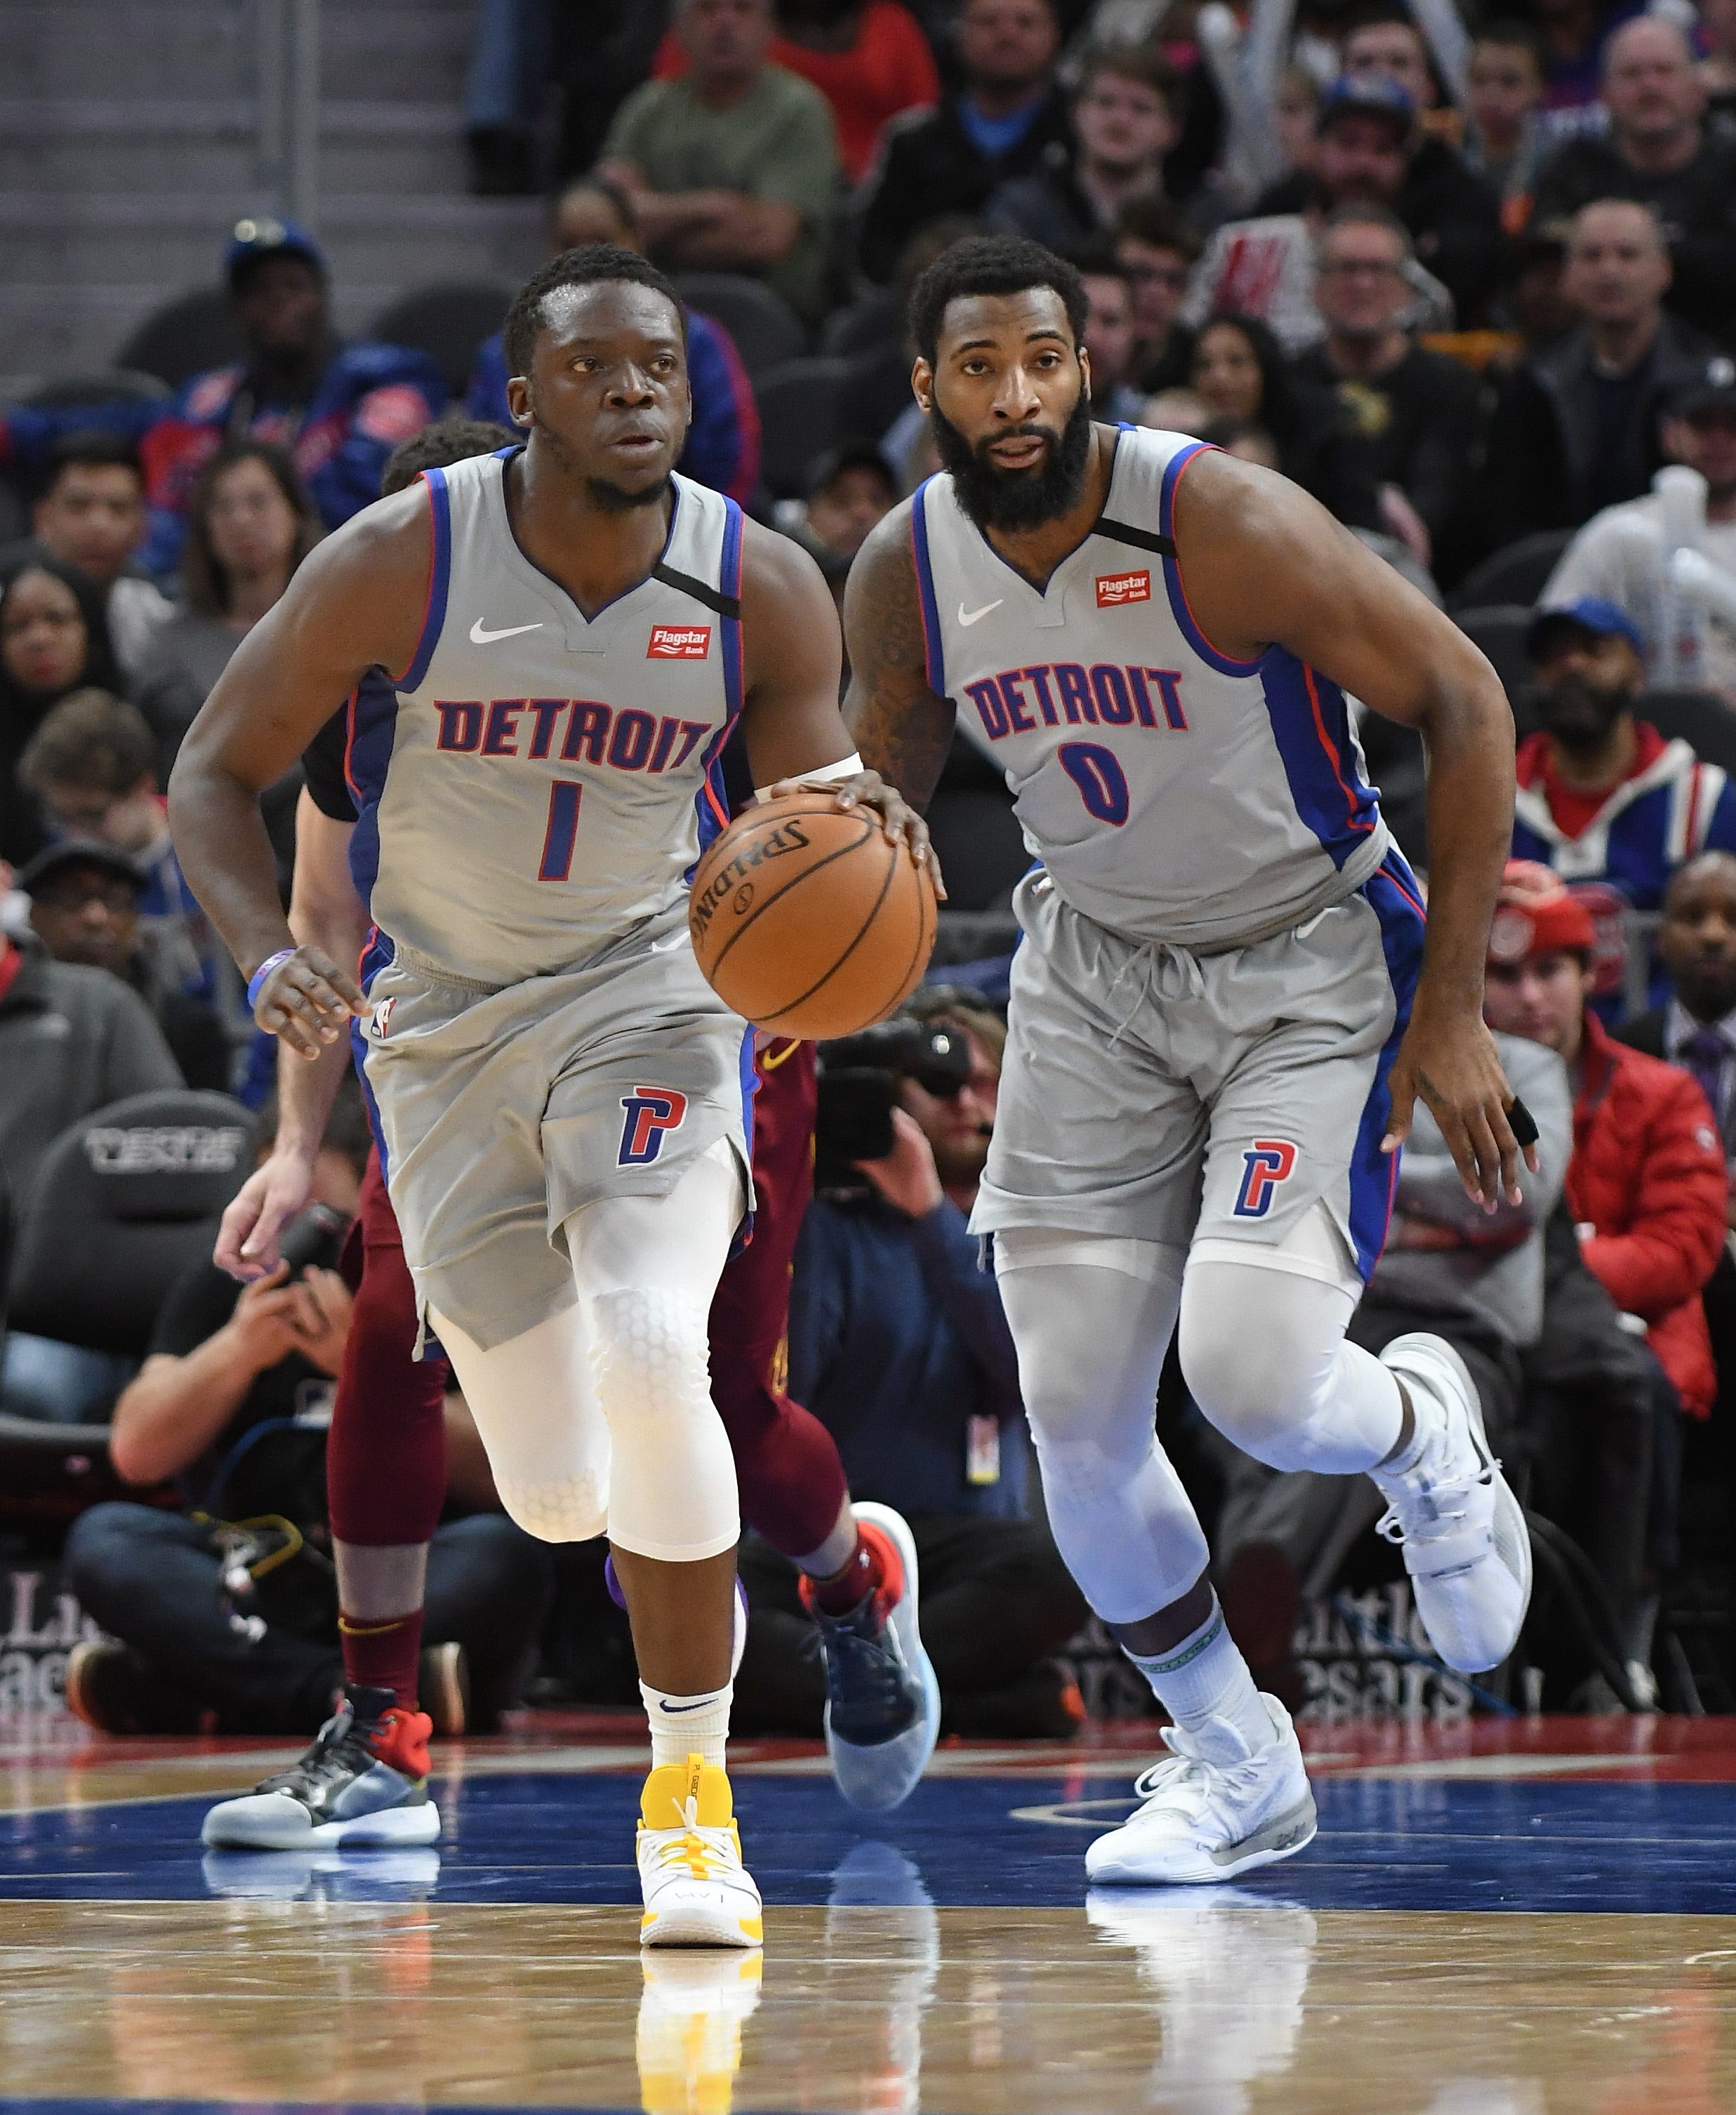 Pistons Reggie Jackson and Andre Drummond bring the ball up court in the second quarter.